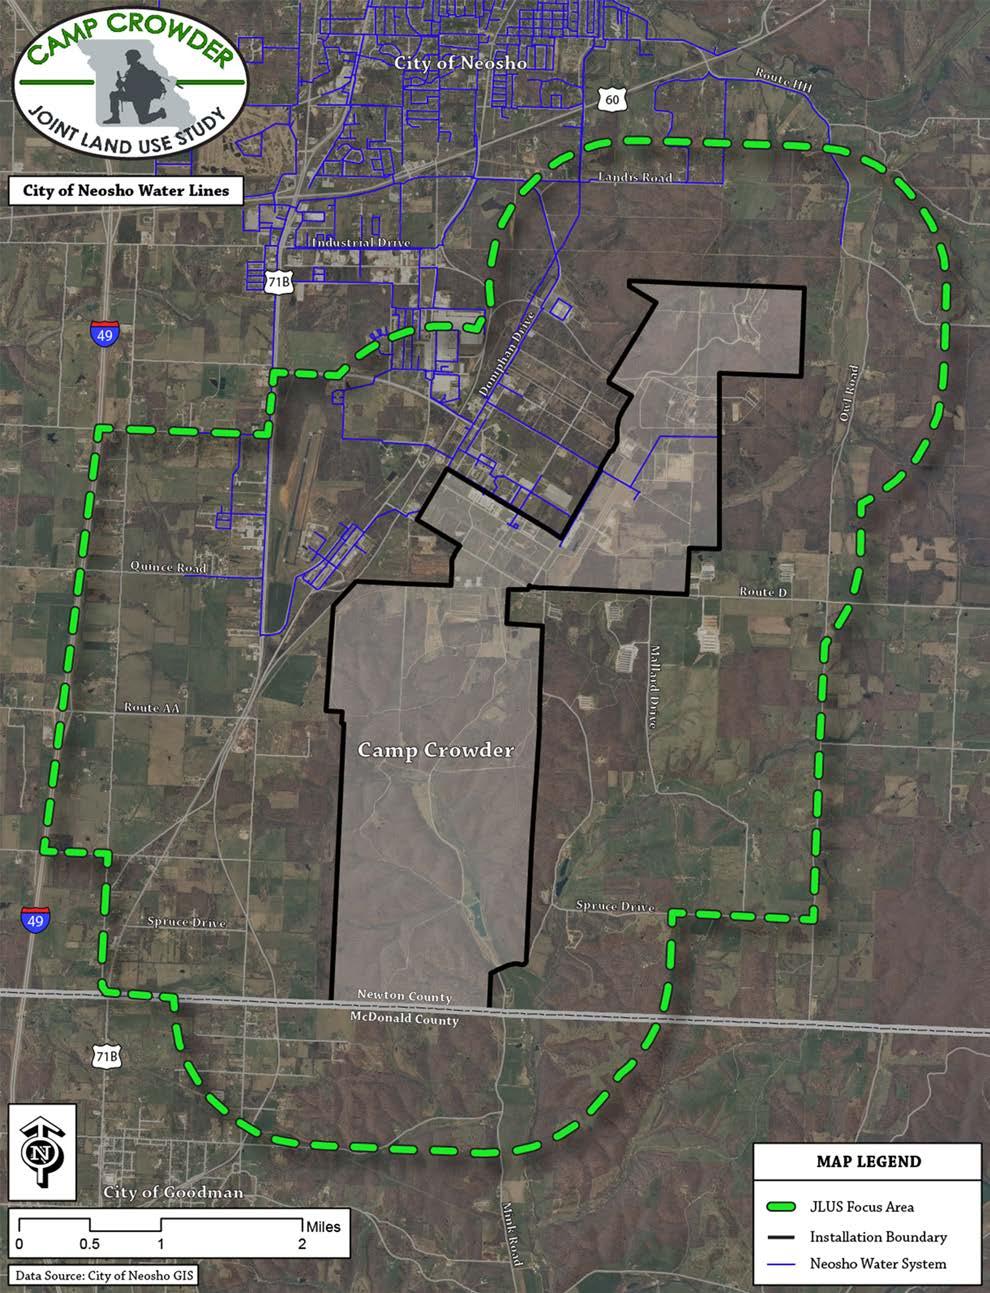 Figure 4-2: City of Neosho Existing Water Lines